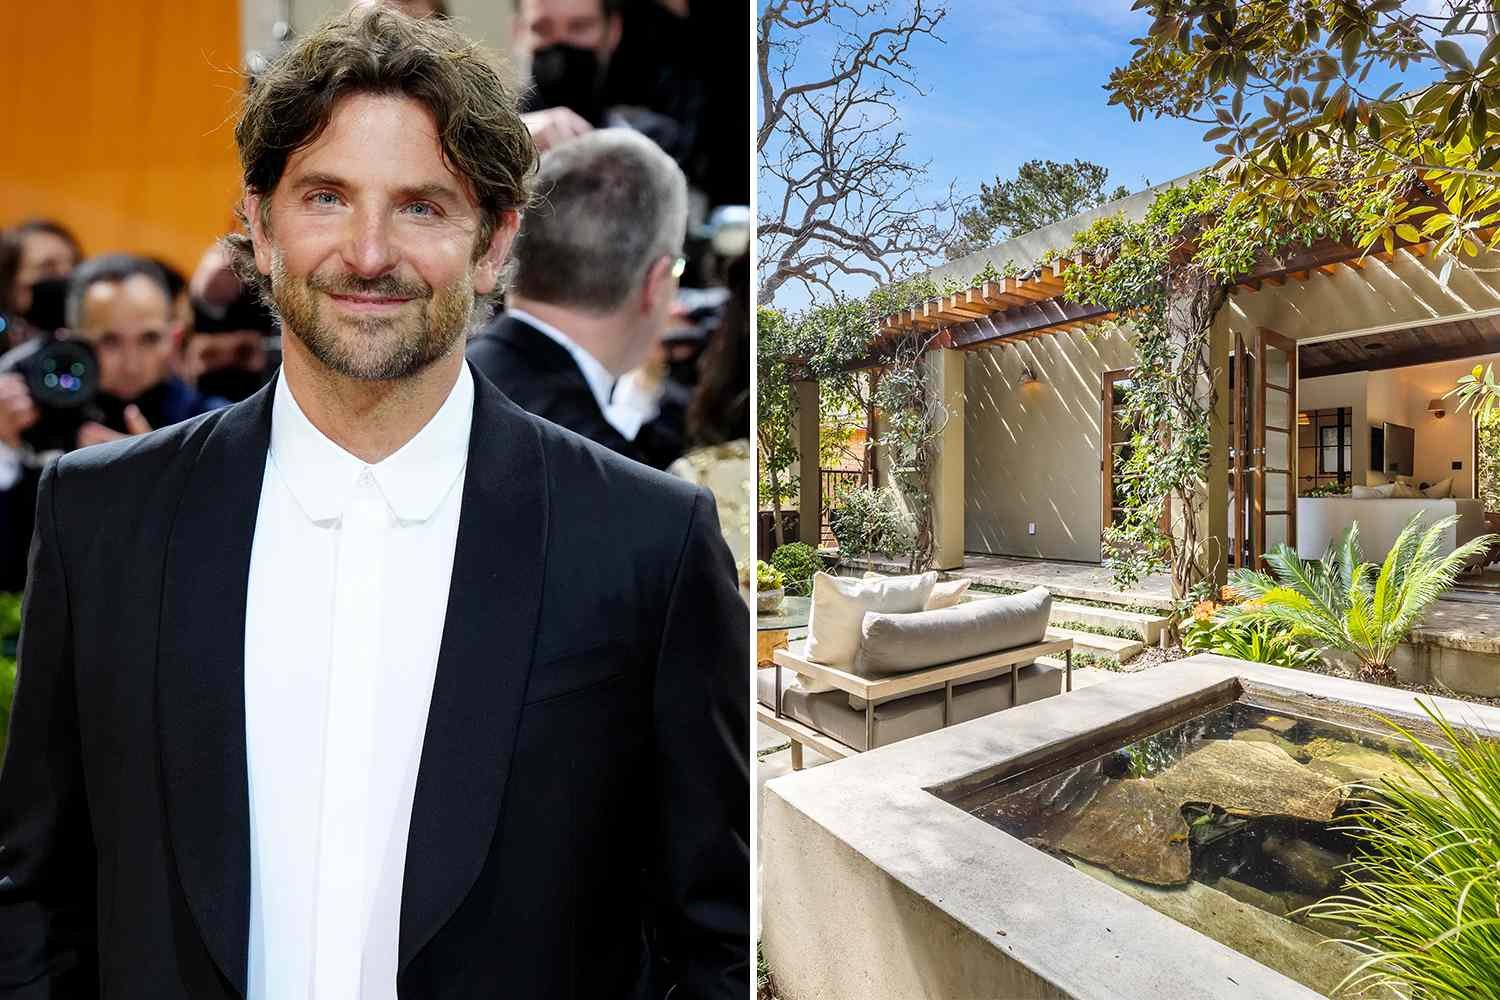 Bradley Cooper Lists First Home He Ever Bought, a Charming Venice Bungalow, for $2.4 Million — See Inside!